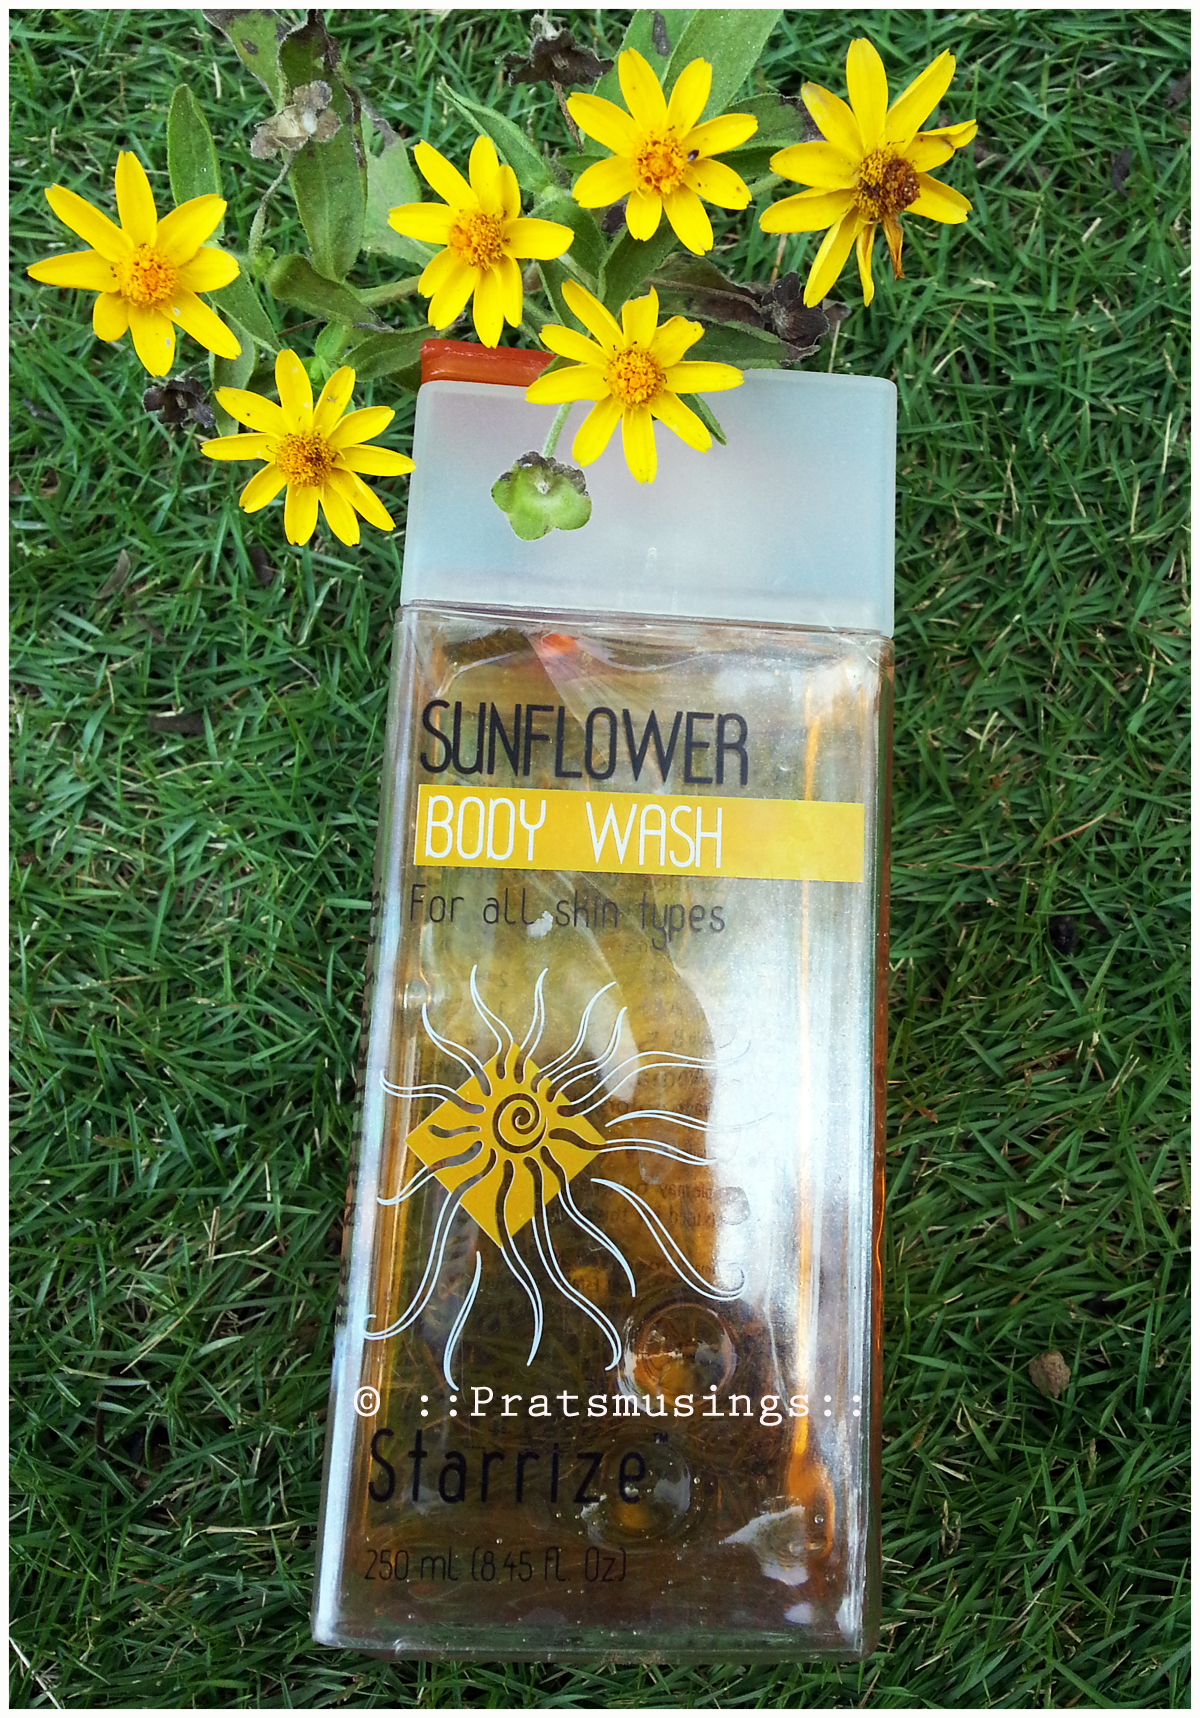 Sunflower Body Wash by The Nature's Co.